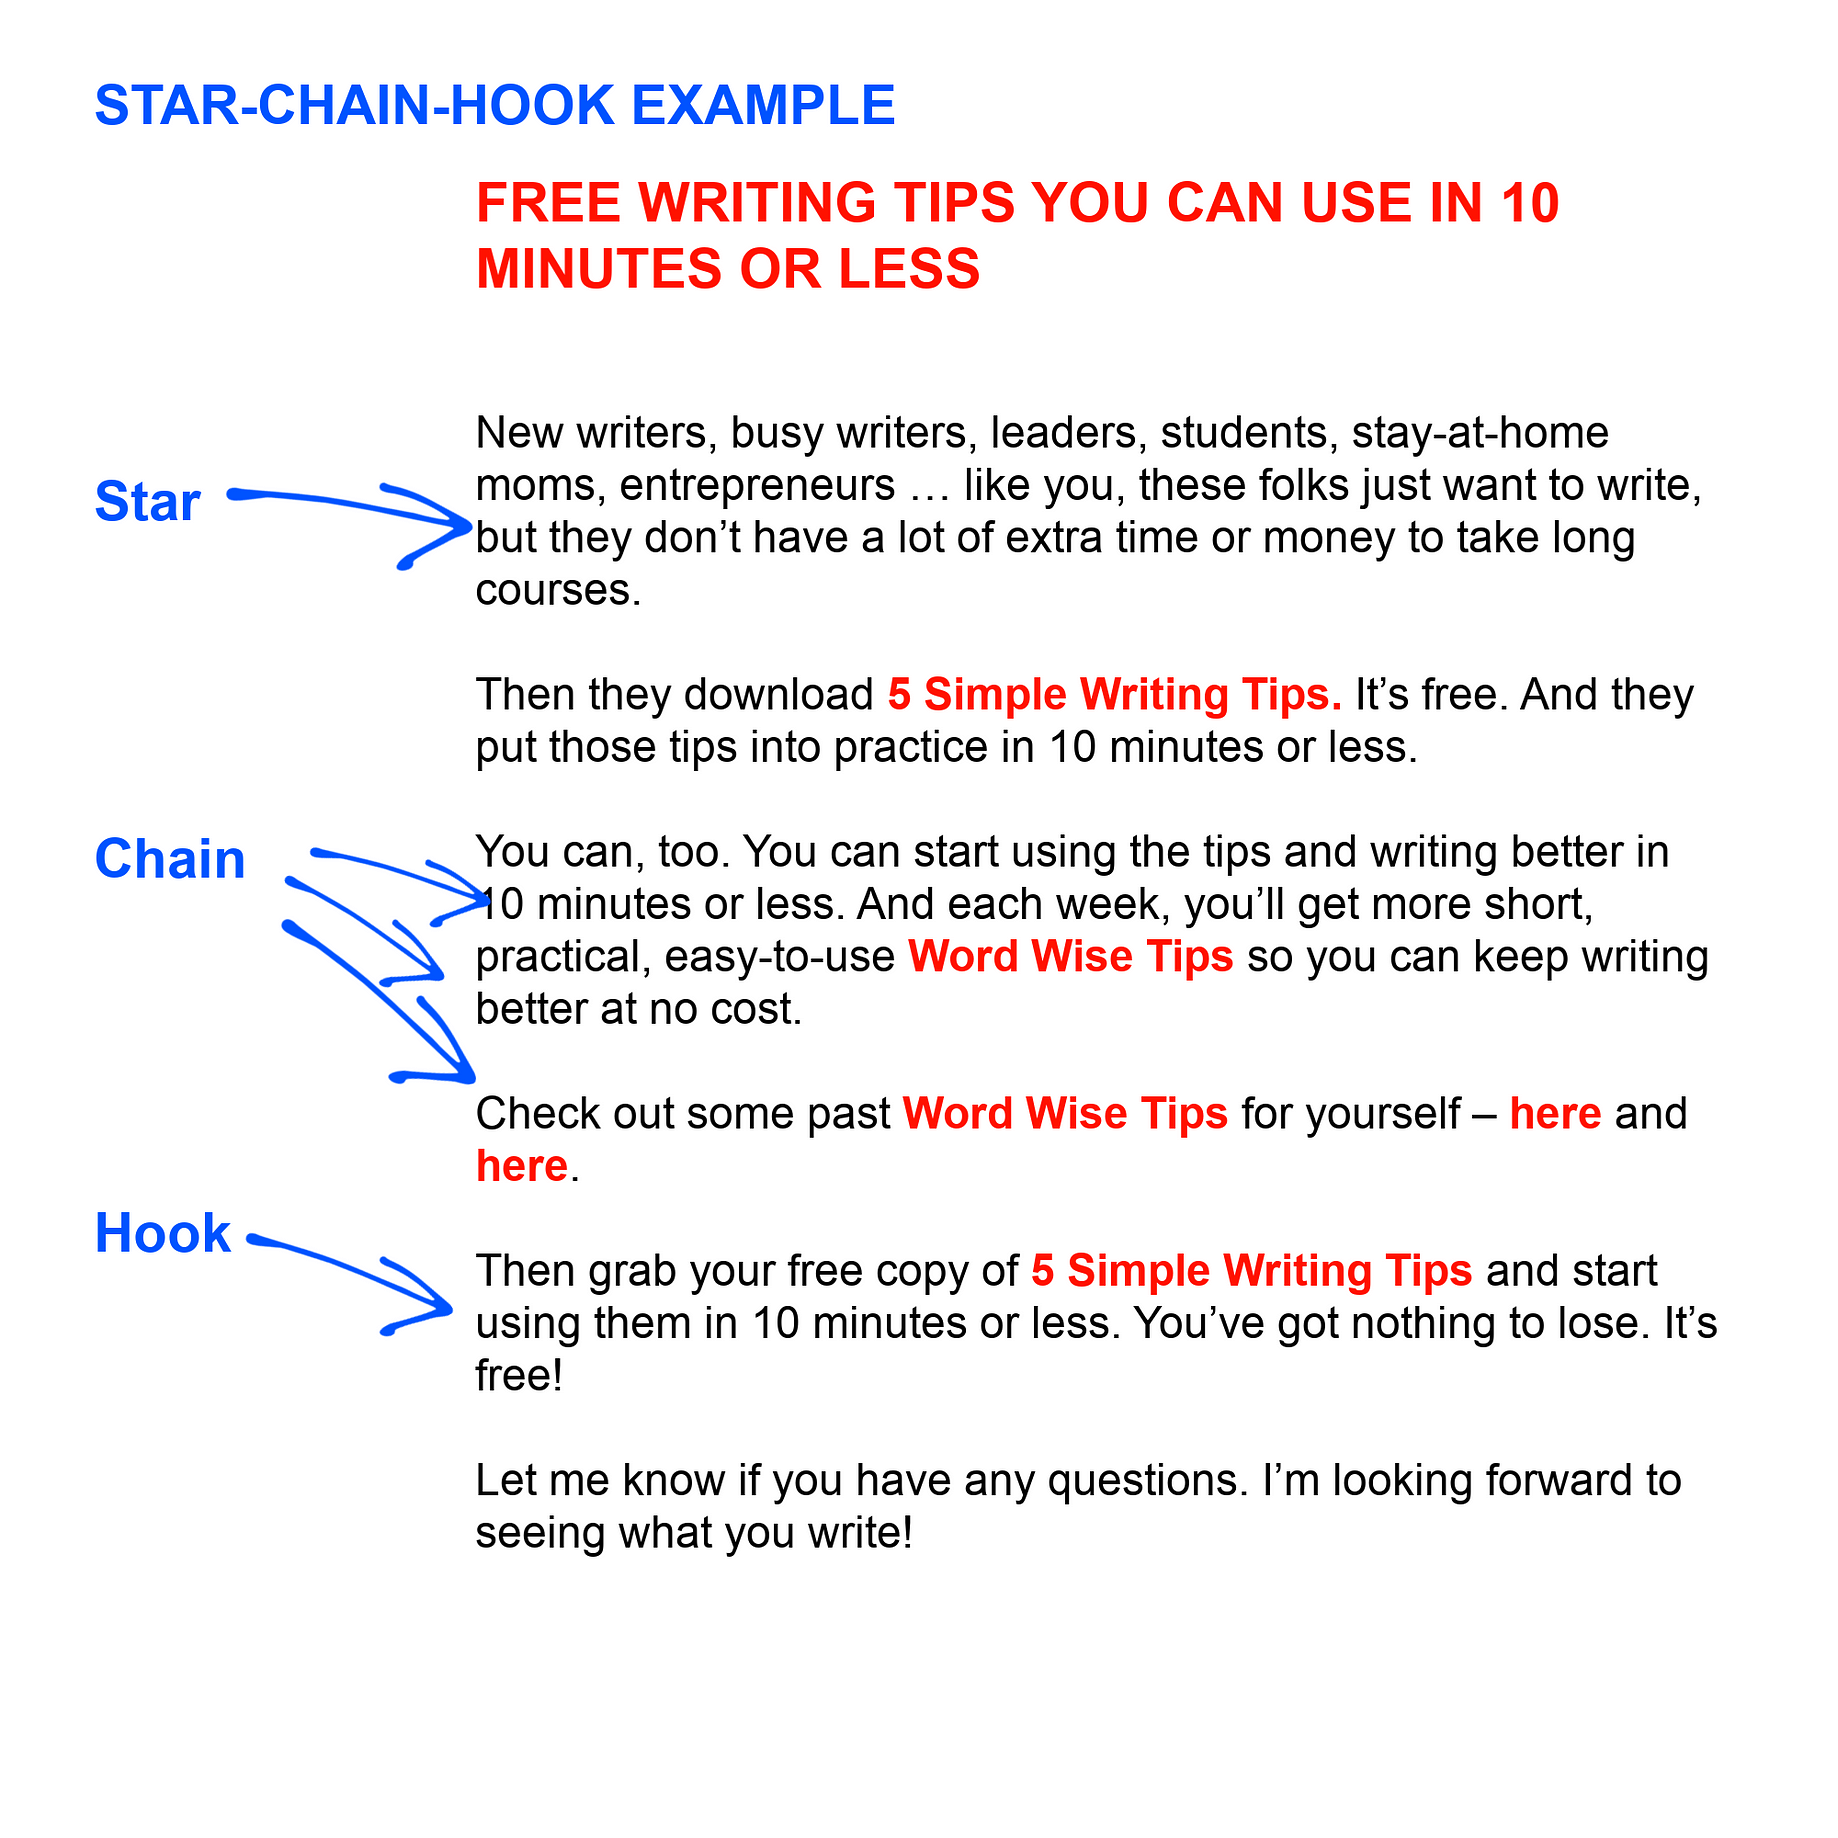 Star-Chain-Hook: A Simple (and Persuasive) Content Writing Formula